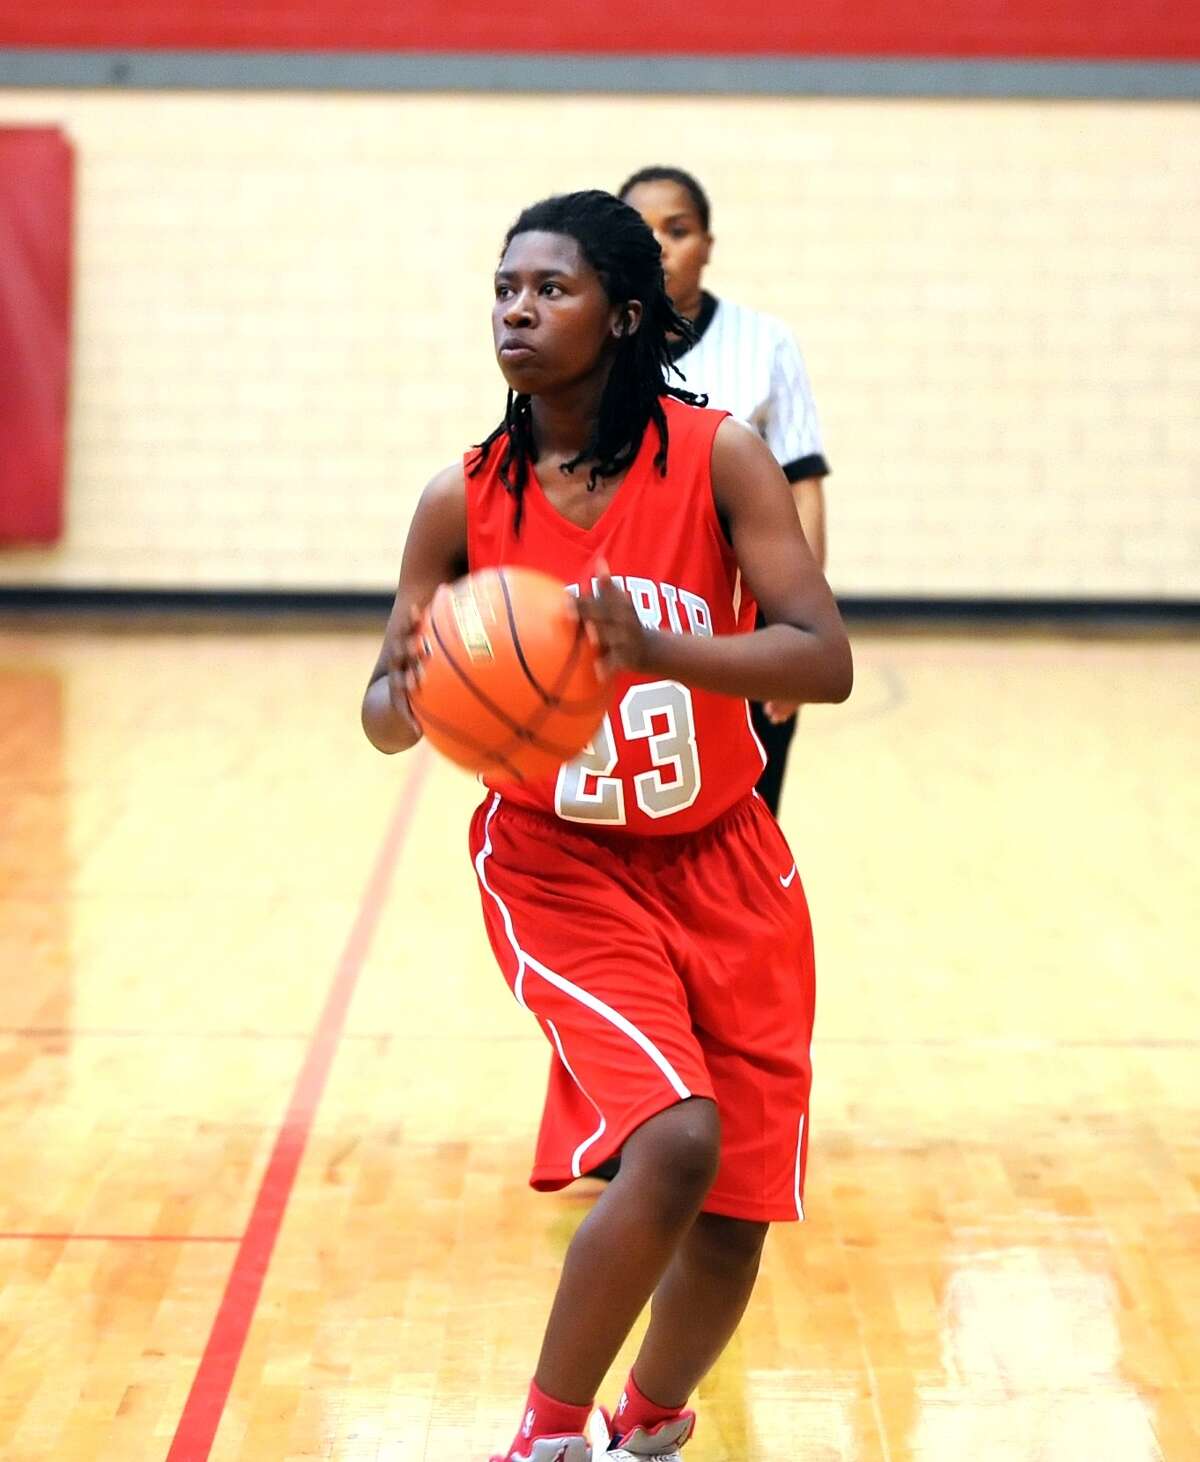 Houston Waltrip girls basketball team, 2013. Waltrip competes in UIL District 214A. Laterra Turner (23) of Waltrip, sets up to shoot an outside shot.